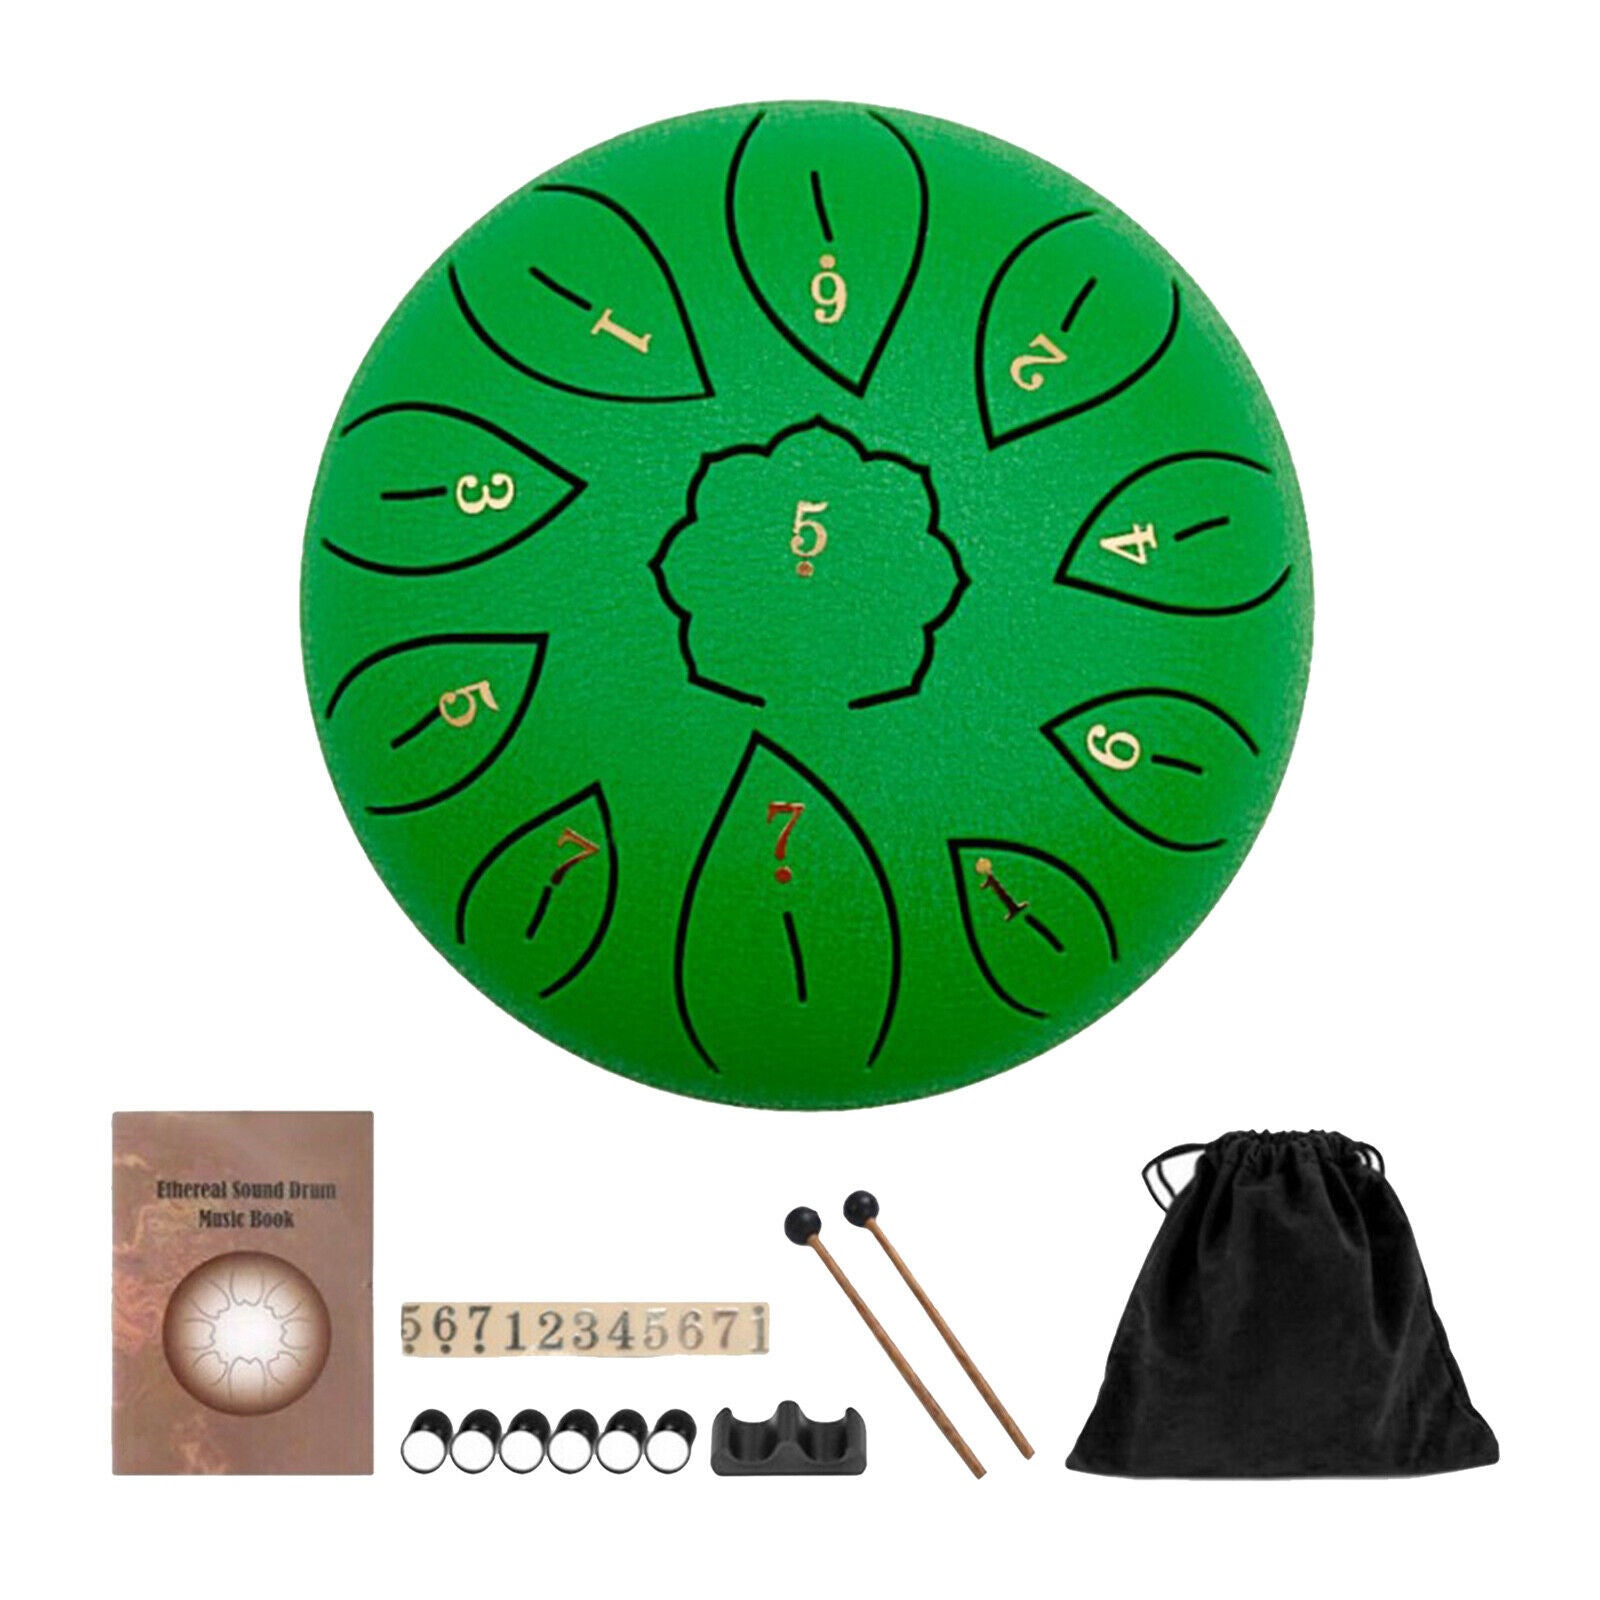 Steel Tongue Drum Handpan Percussion Instrument & Notes Stickers Gift green